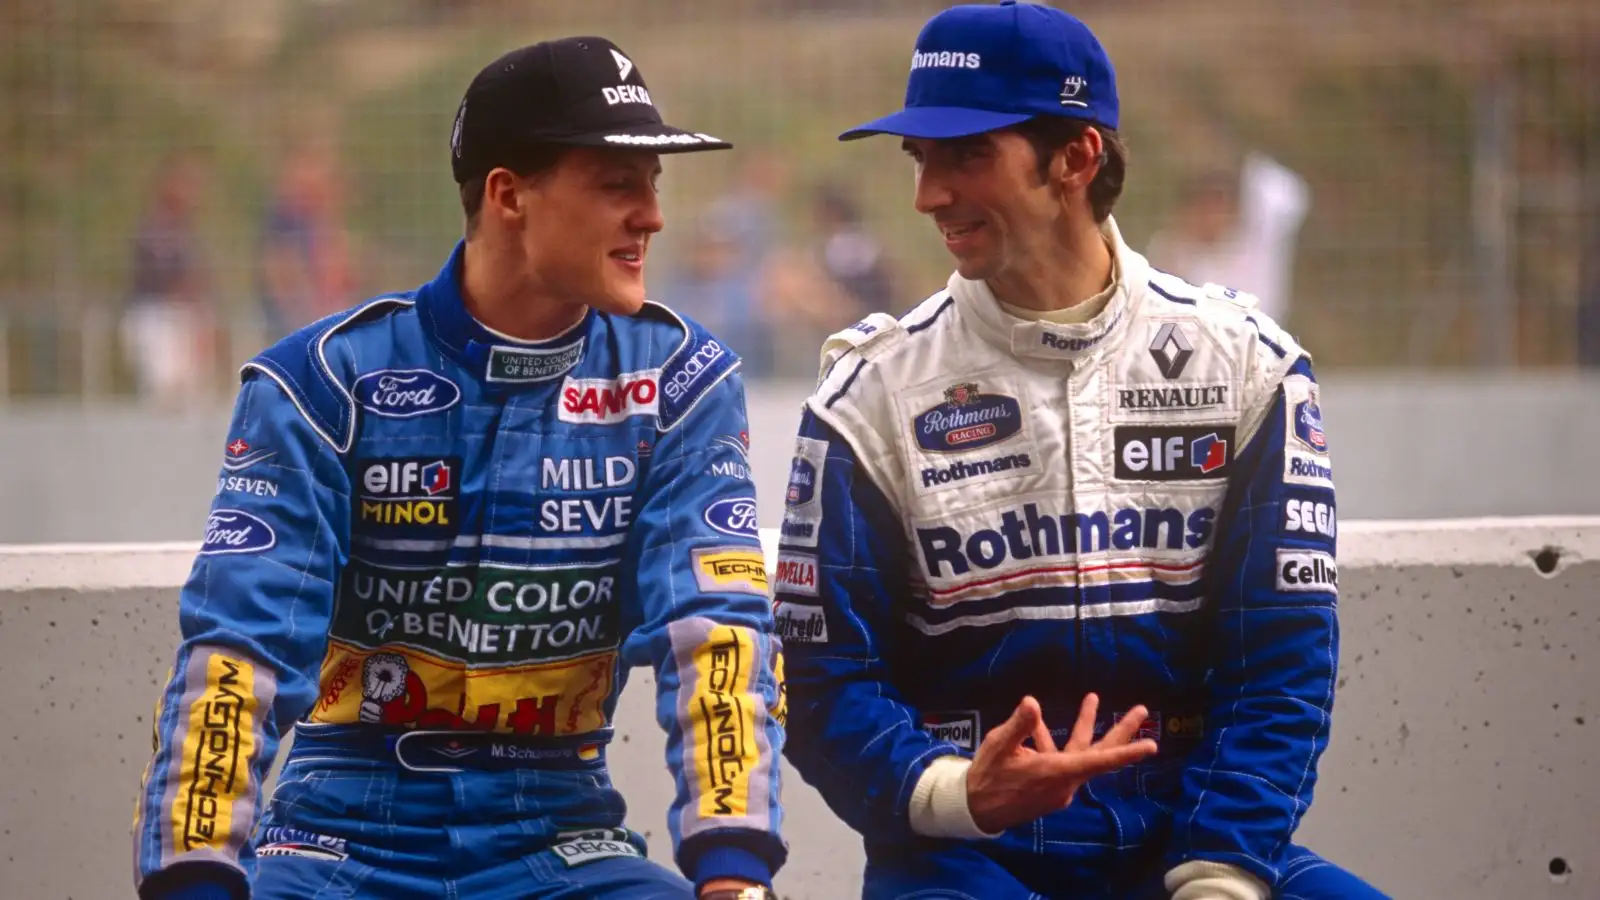 Bitter title rivals Michael Schumacher (Benetton) and Damon Hill (Williams) in conversation during the F1 1994 season.